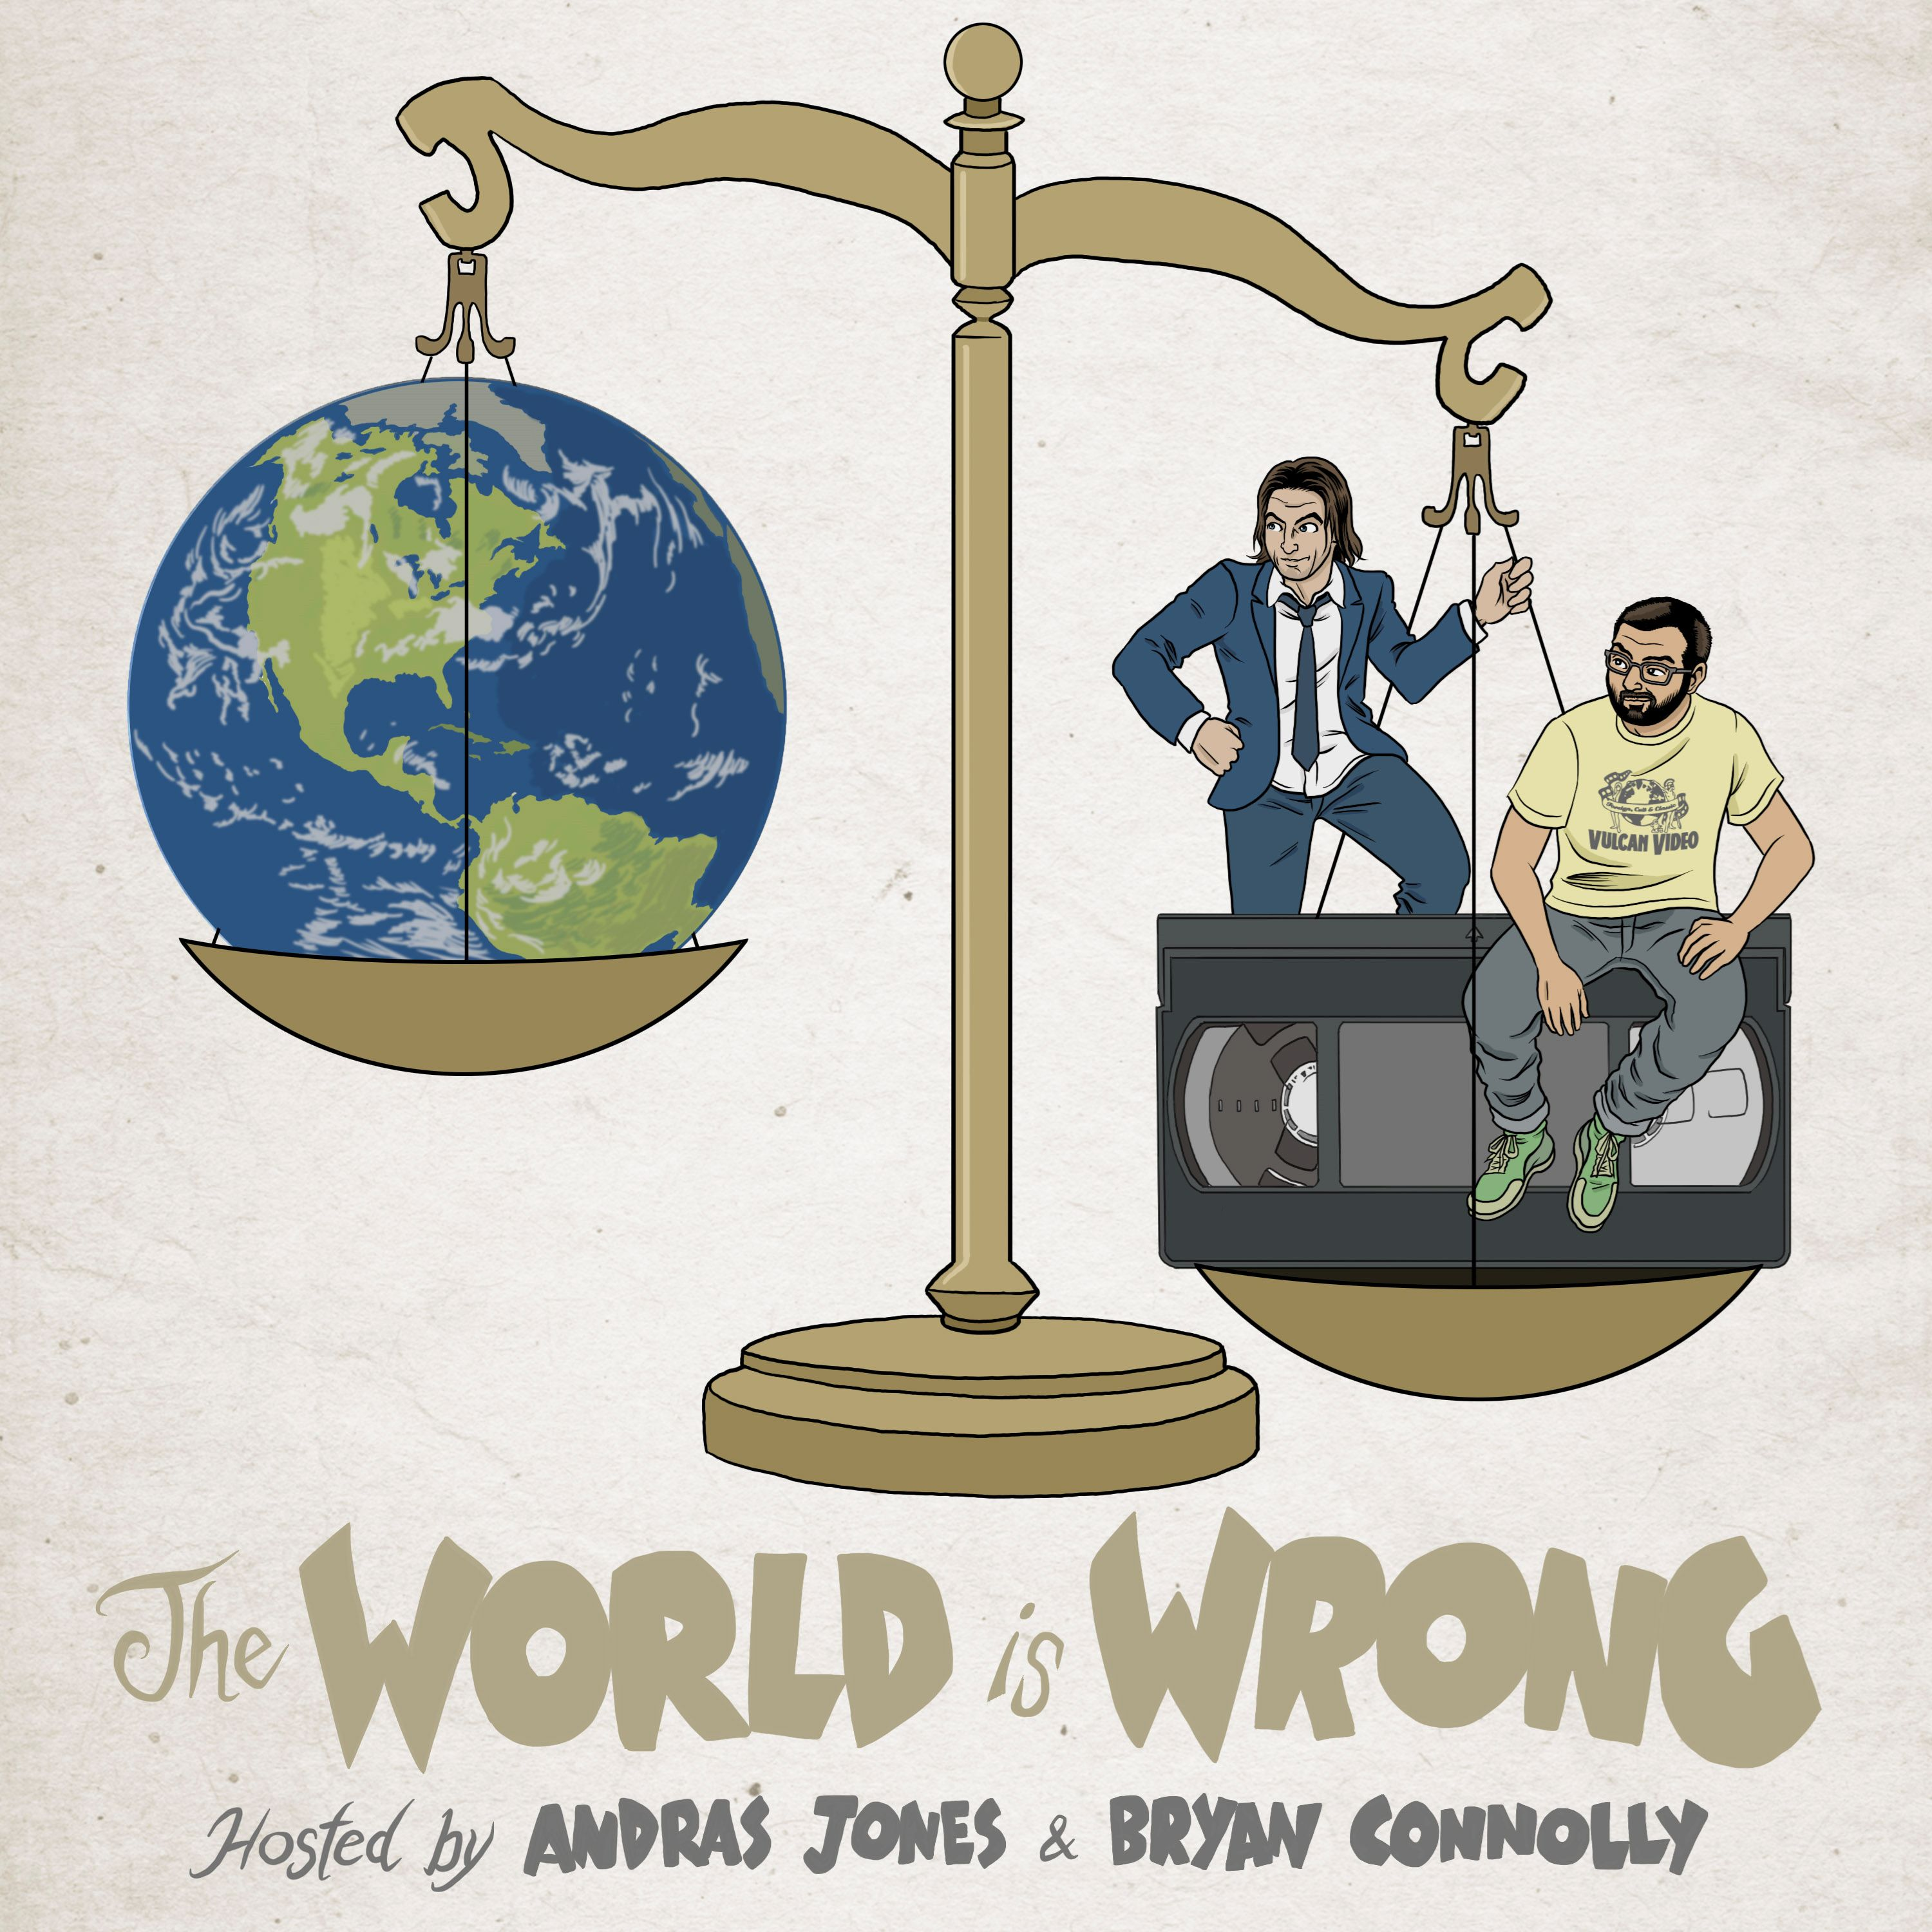 ...about The World is Wrong (Season 2 Wrap-Up)